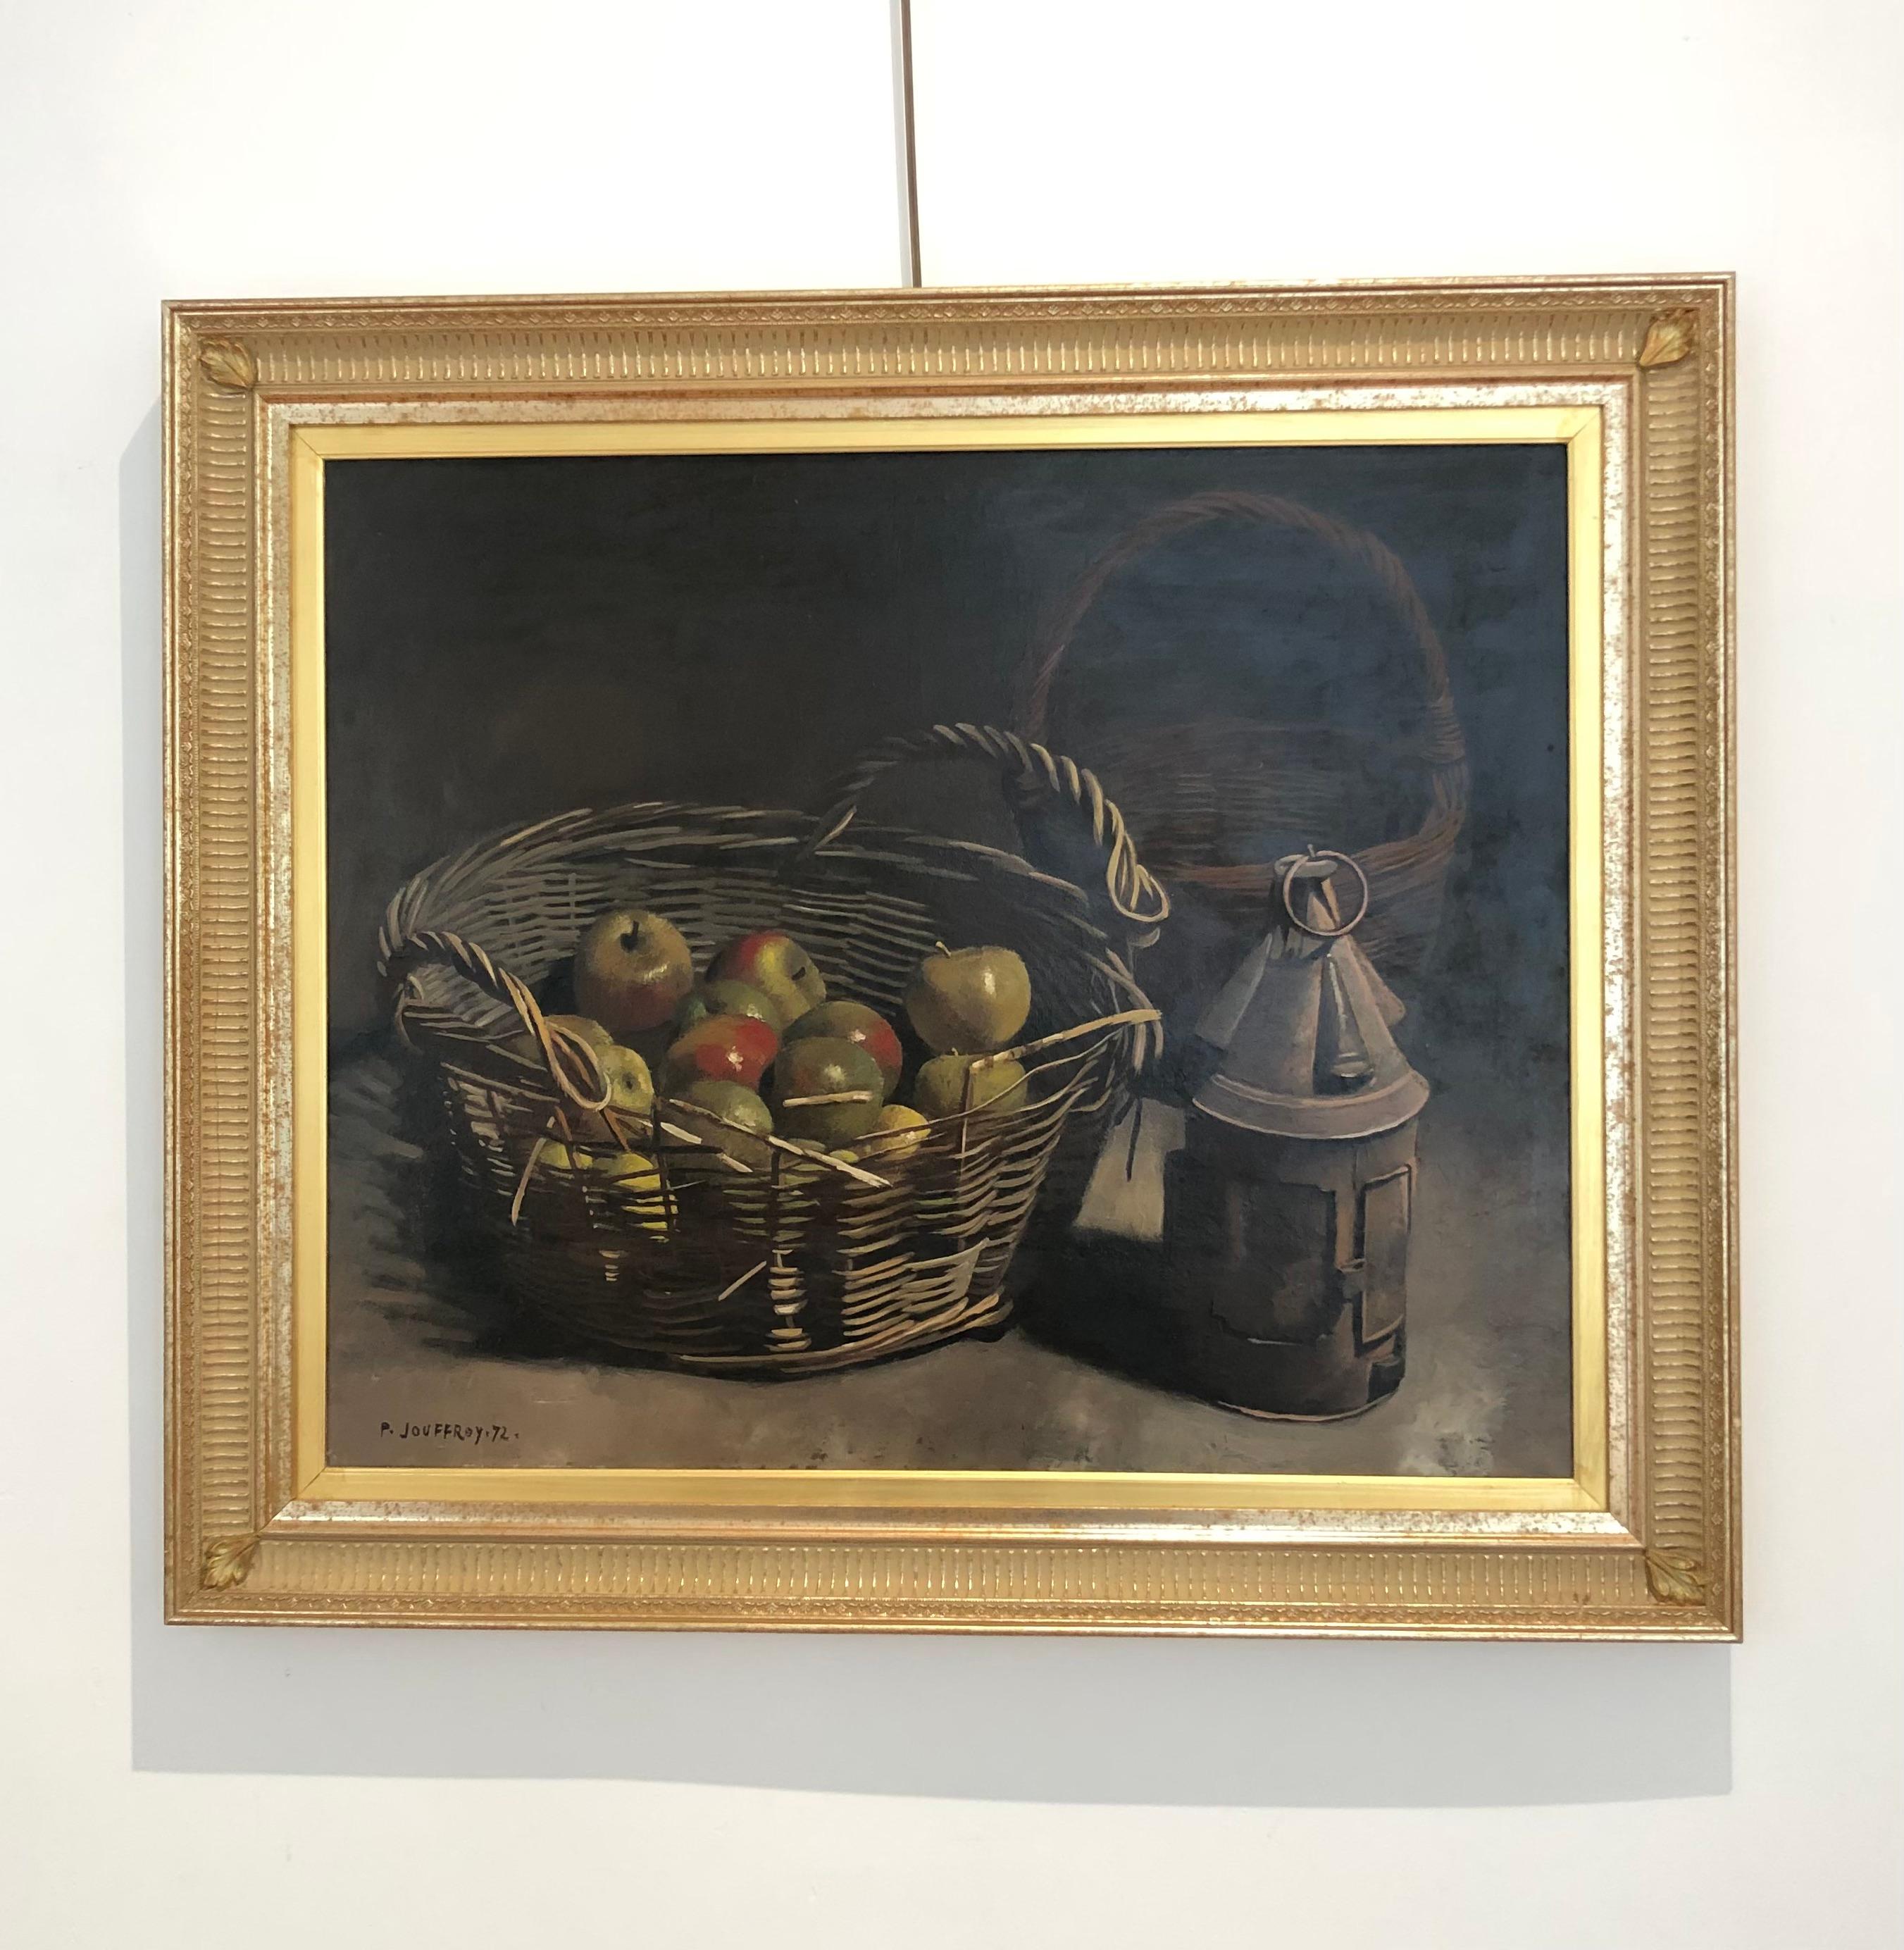 Still life with wicker baskets - Painting by Pierre Jouffroy